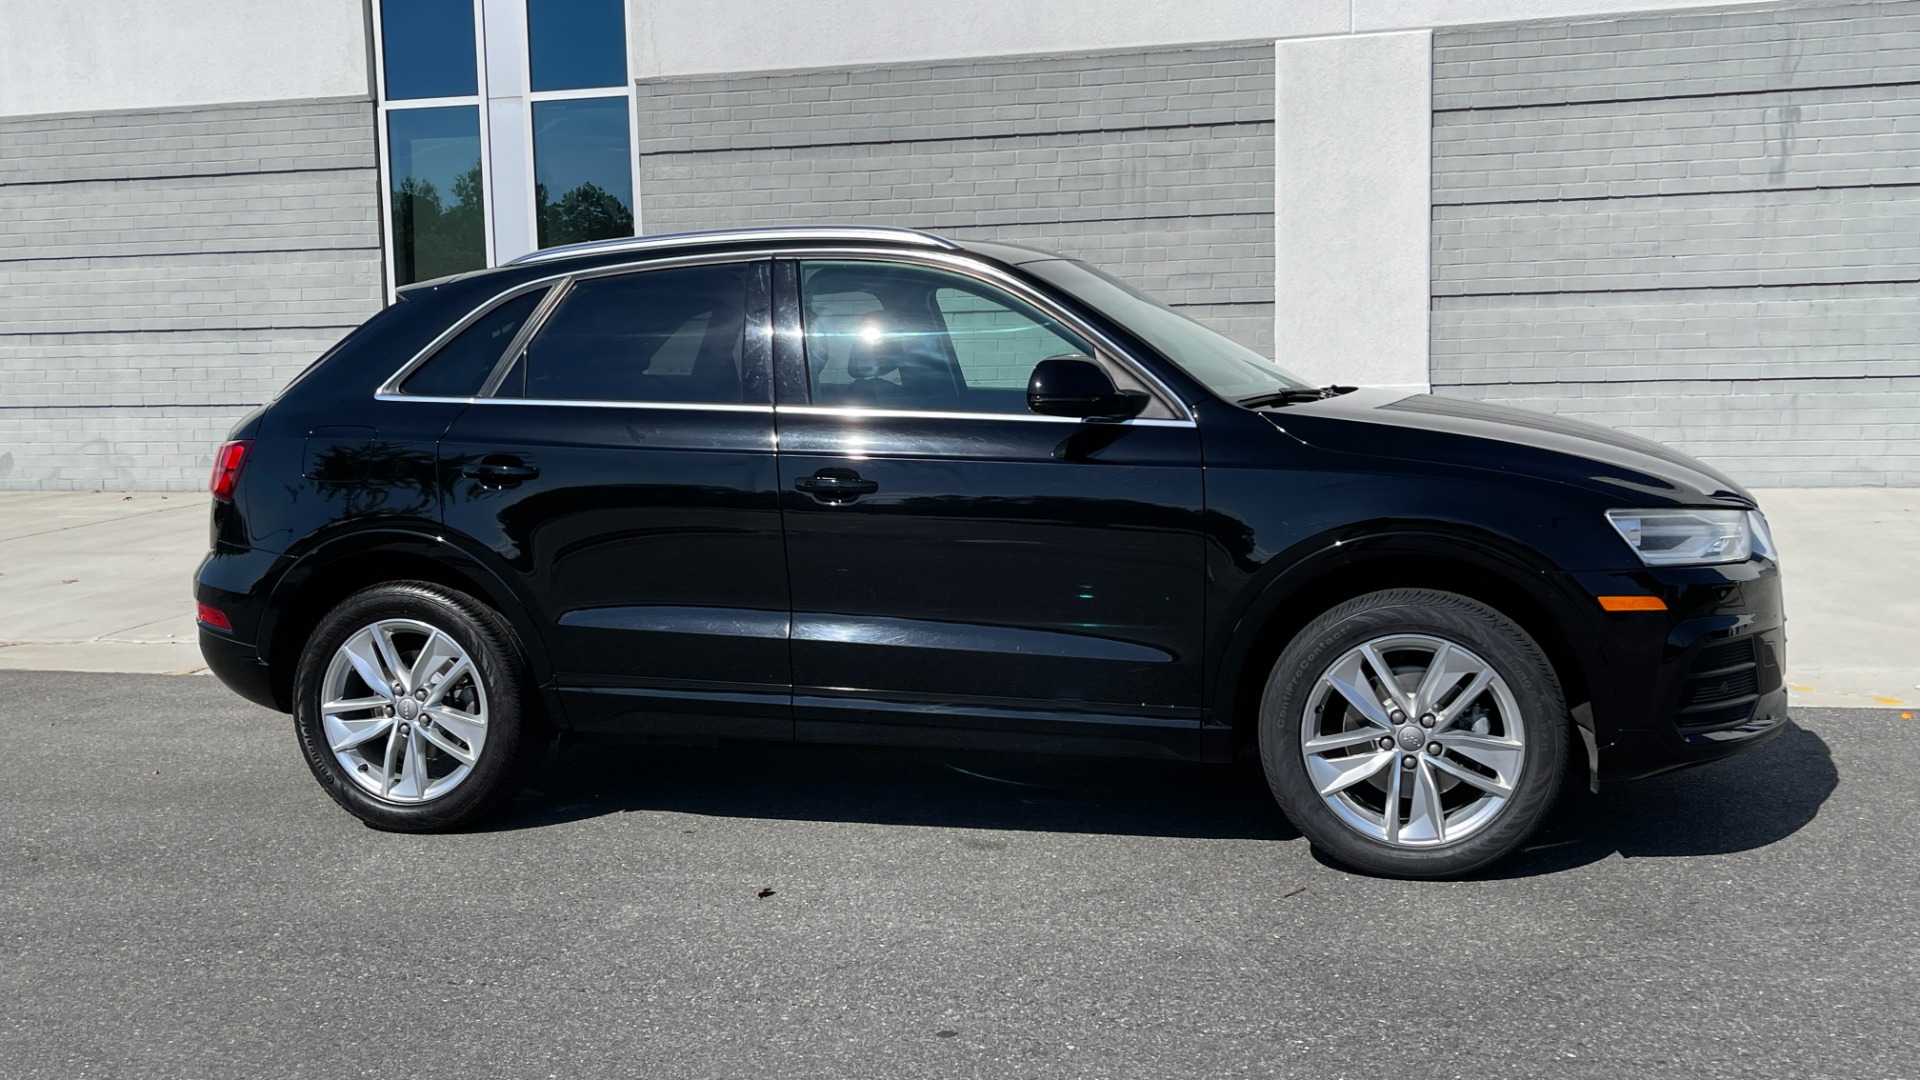 Used 2016 Audi Q3 PREMIUM PLUS / LEATHER / BACKUP CAMERA / HOMELINK / SIRIUS XM / AWD for sale $22,684 at Formula Imports in Charlotte NC 28227 6